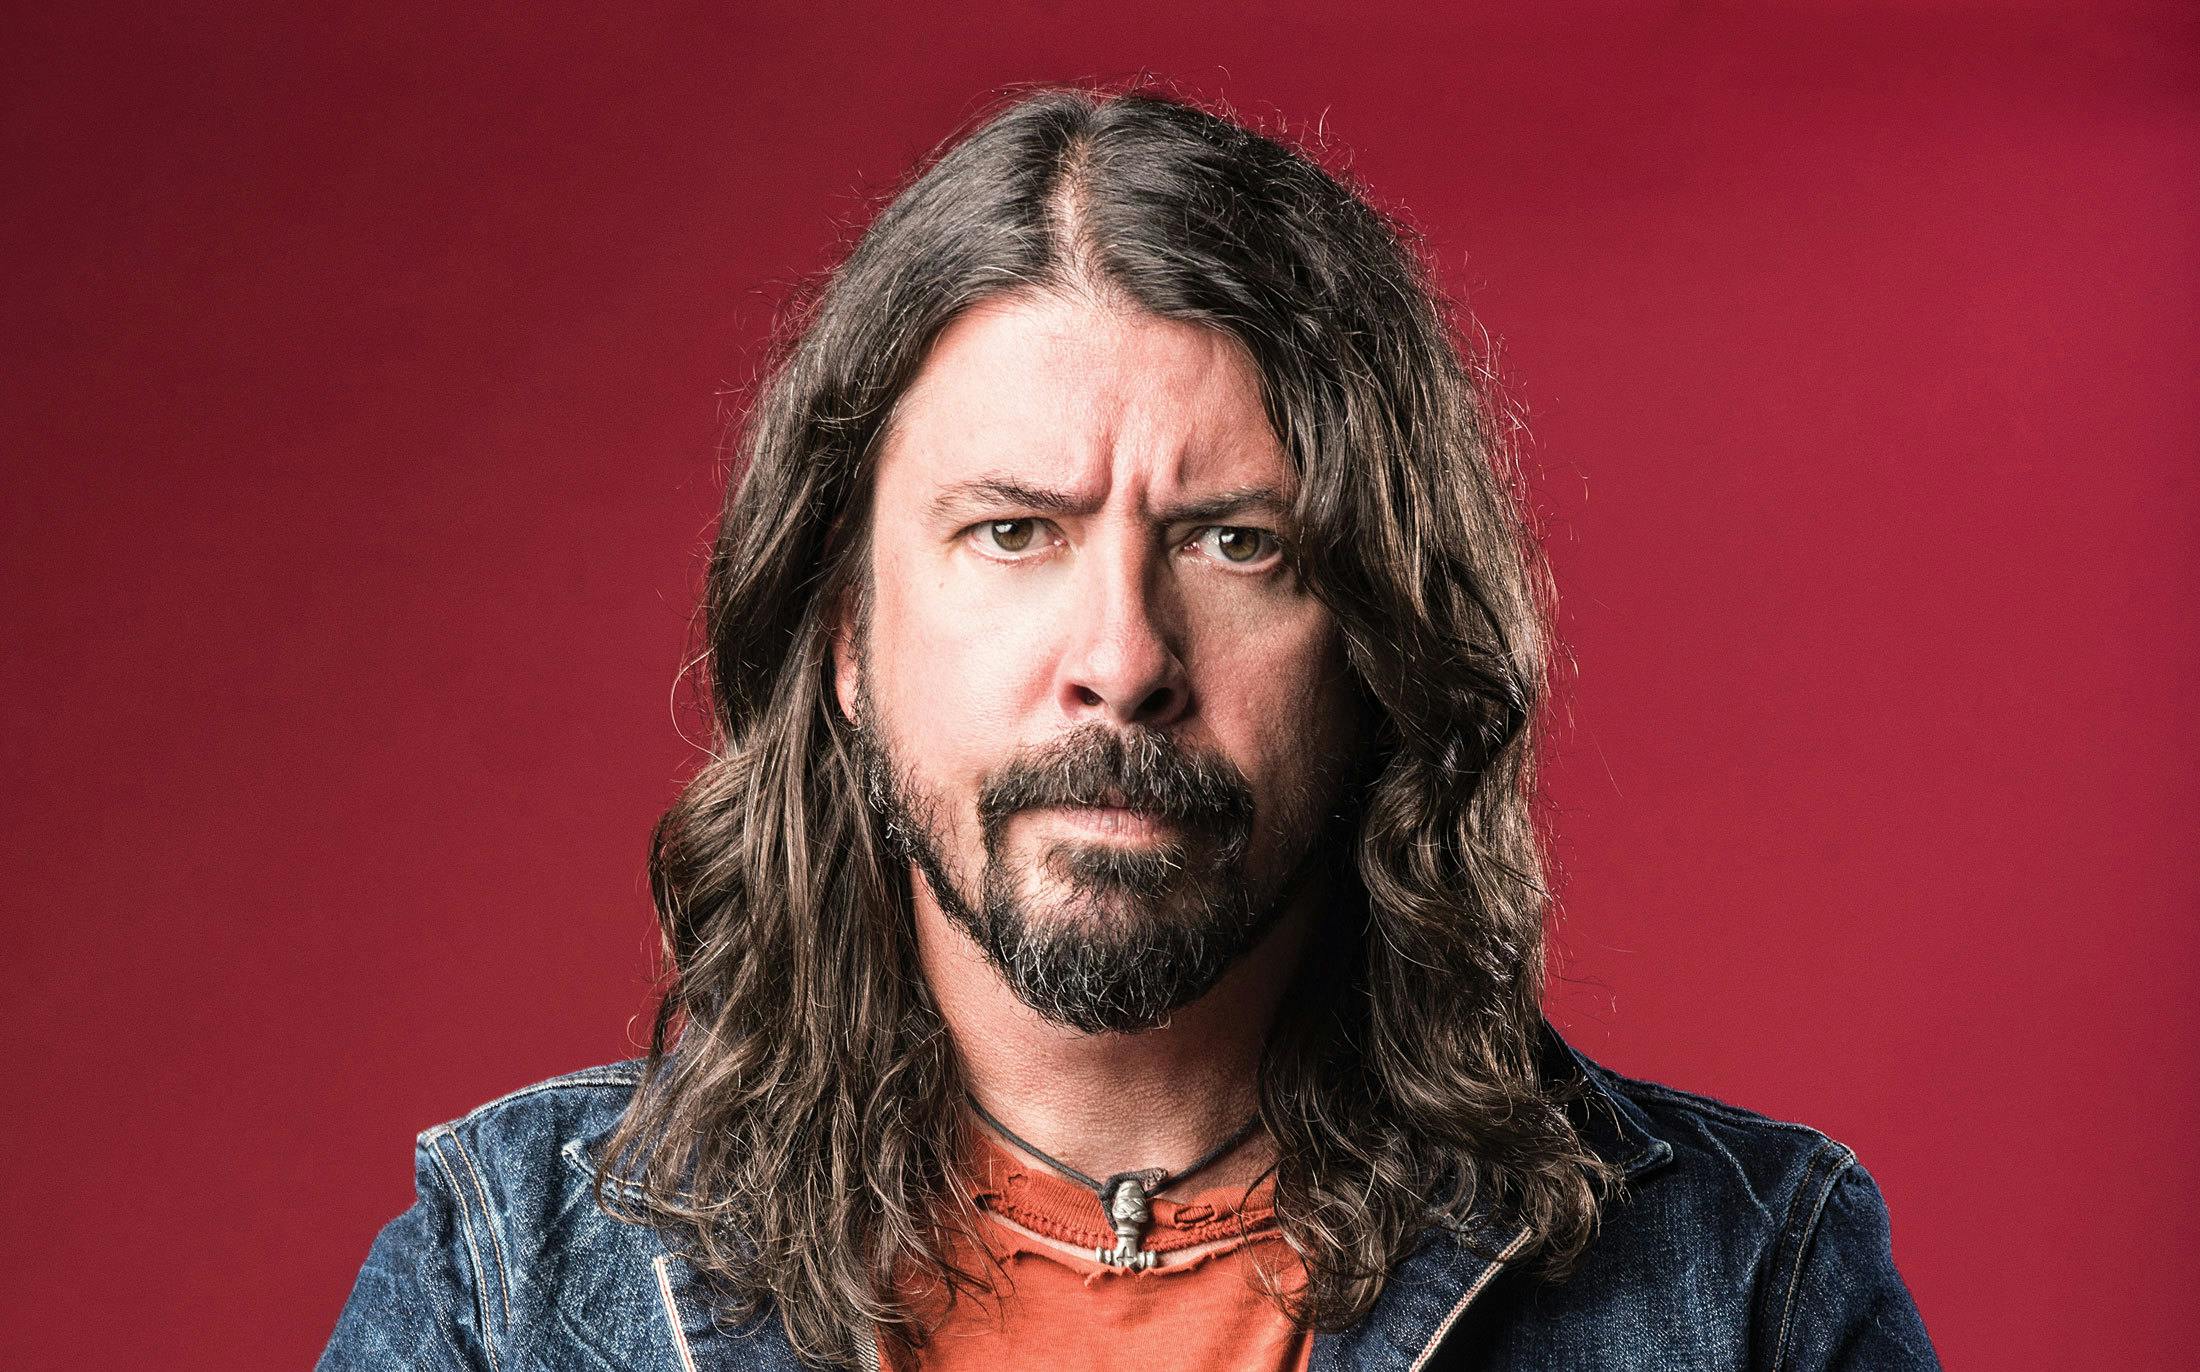 Dave Grohl Releases First Audio Episode Of His Dave's True Stories Series